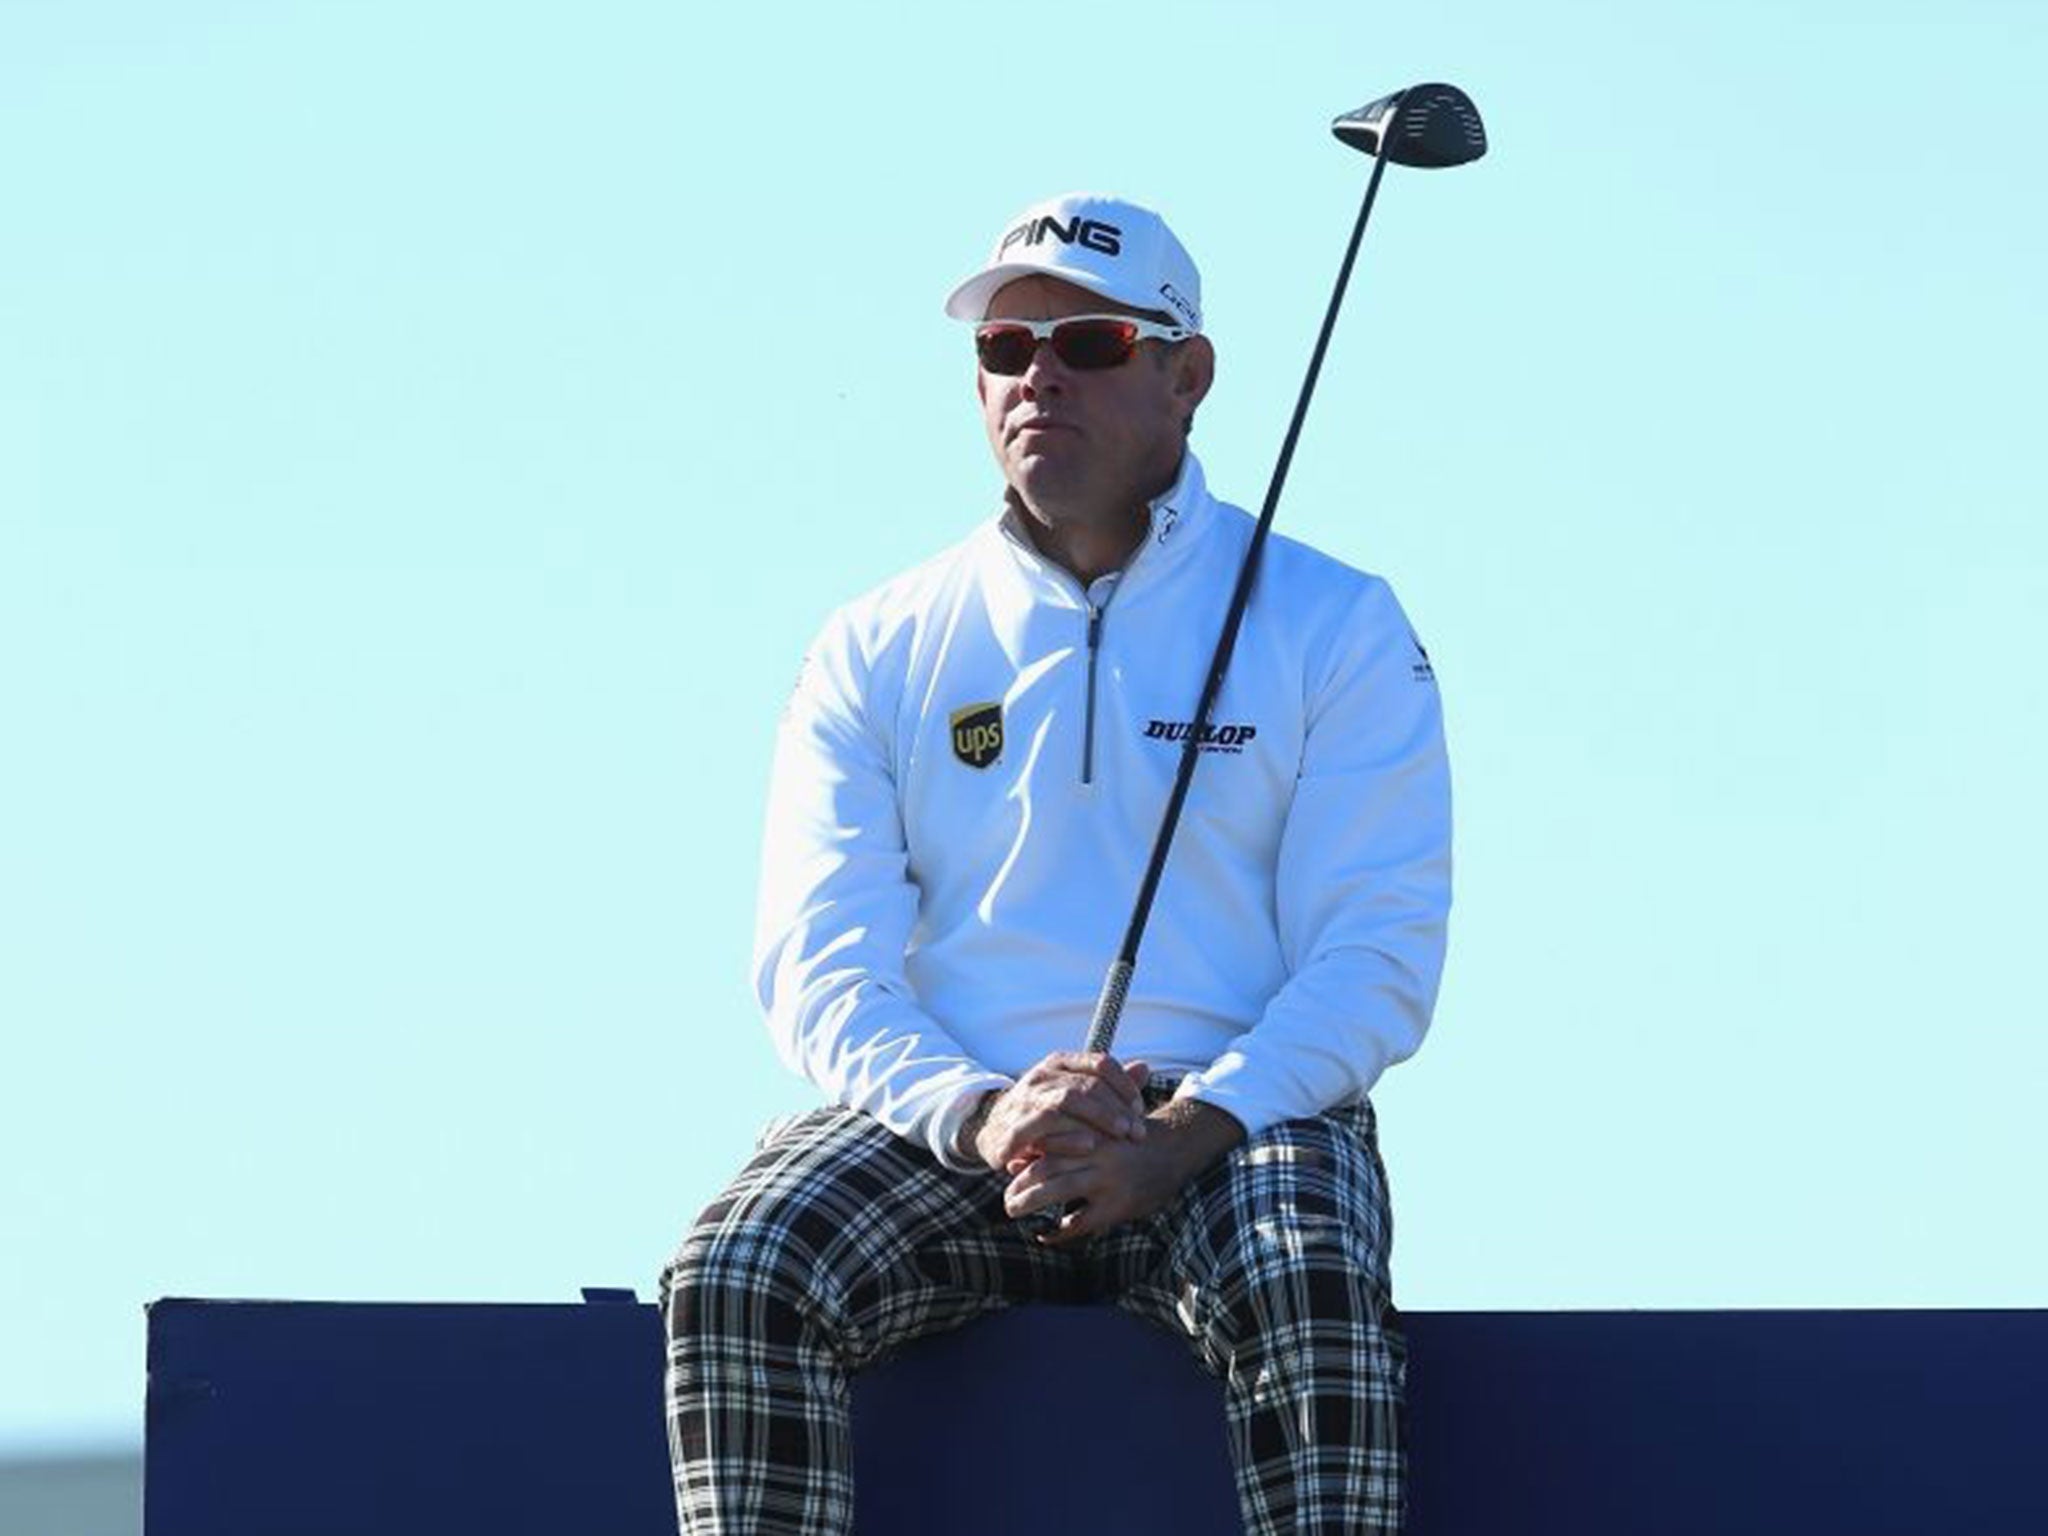 Box seat: Lee Westwood says he is feeling refreshed and raring to go after taking a break ahead of this year’s Open at Hoylake, which starts on Thursday